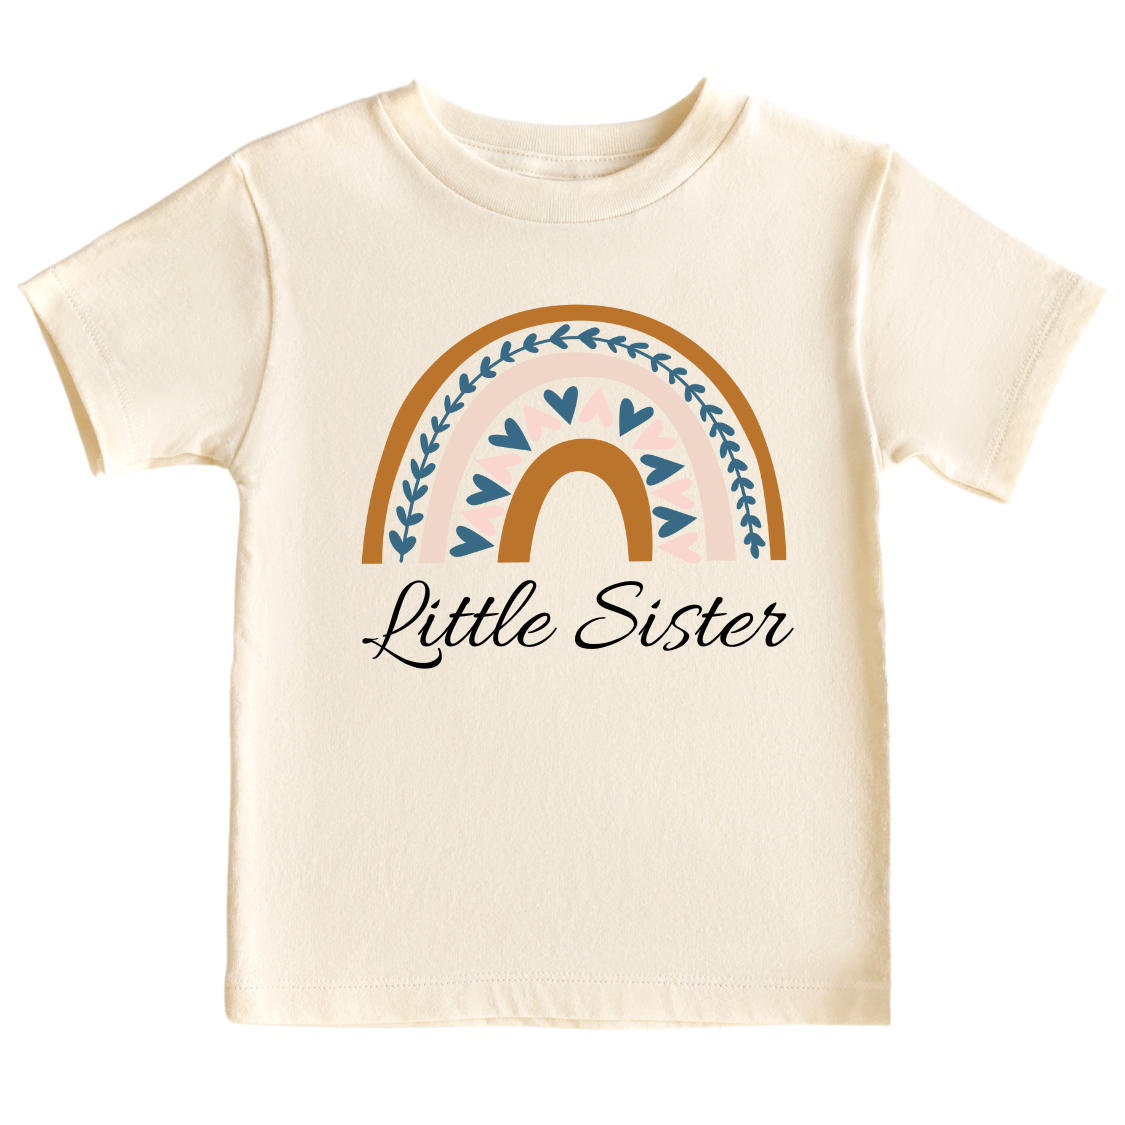 A kid's t-shirt with a boho printed graphic of a colorful rainbow and the text 'Little Sister.' This enchanting t-shirt celebrates the arrival of a precious little sister.